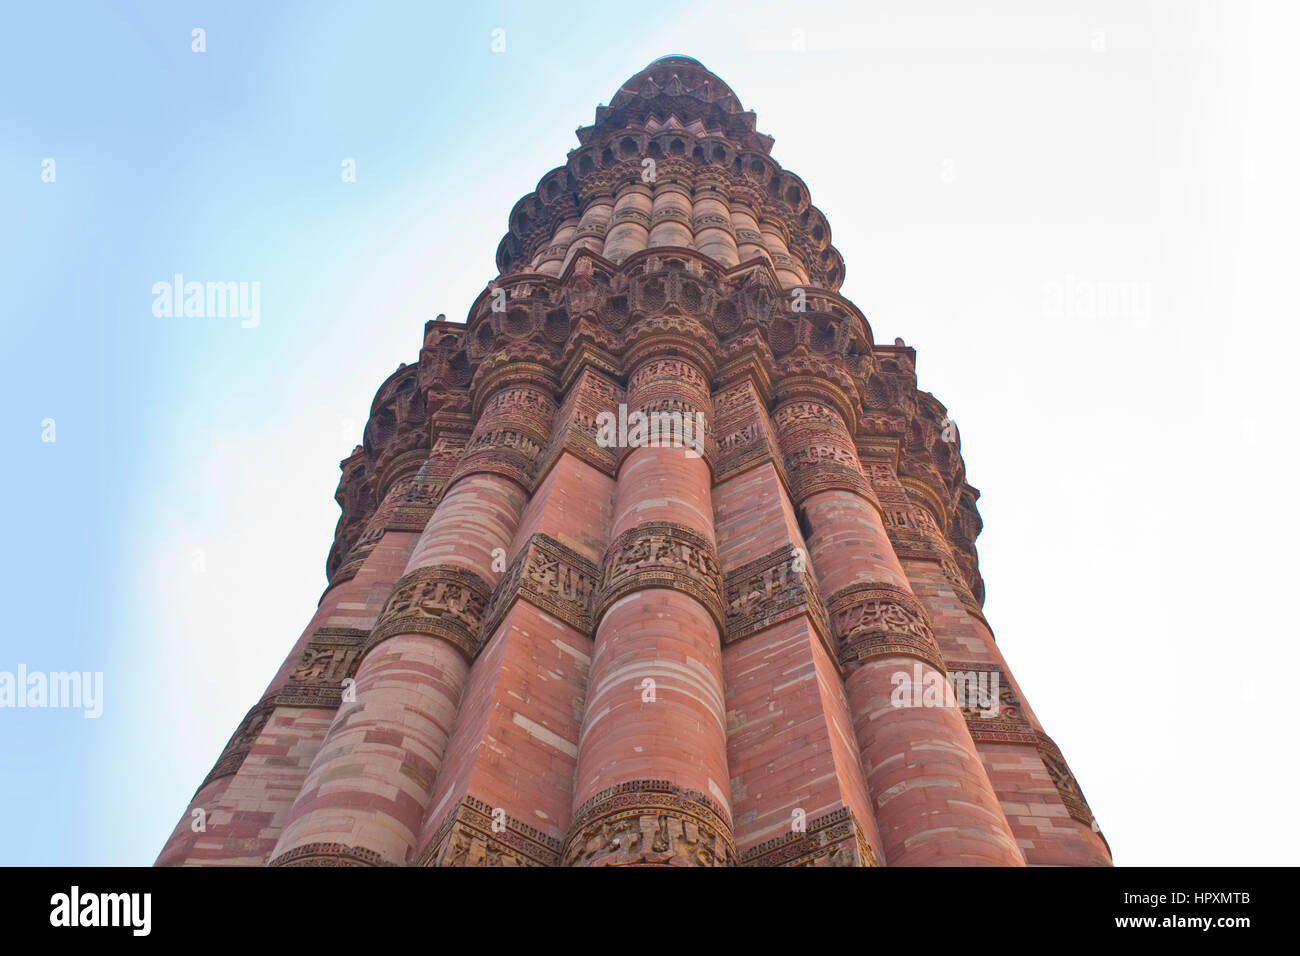 Qutub Minar is the tallest brick minaret in the world. The Qutub Minar is 72.5 metres high (237.8 ft) and requires 399 steps to get to the top. Stock Photo